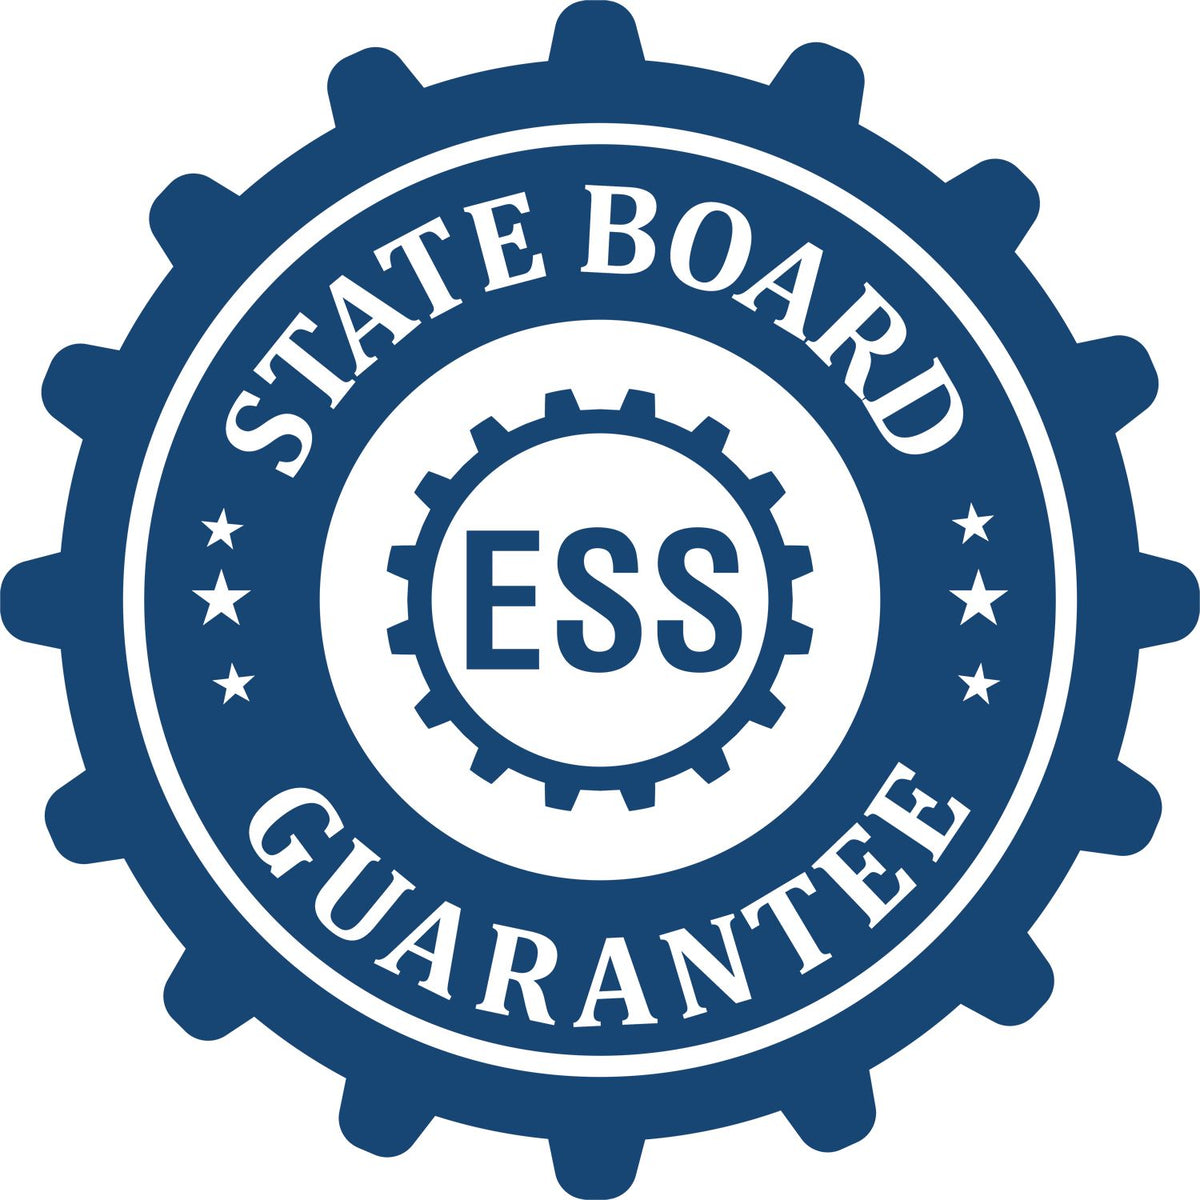 An emblem in a gear shape illustrating a state board guarantee for the Gift Texas Landscape Architect Seal